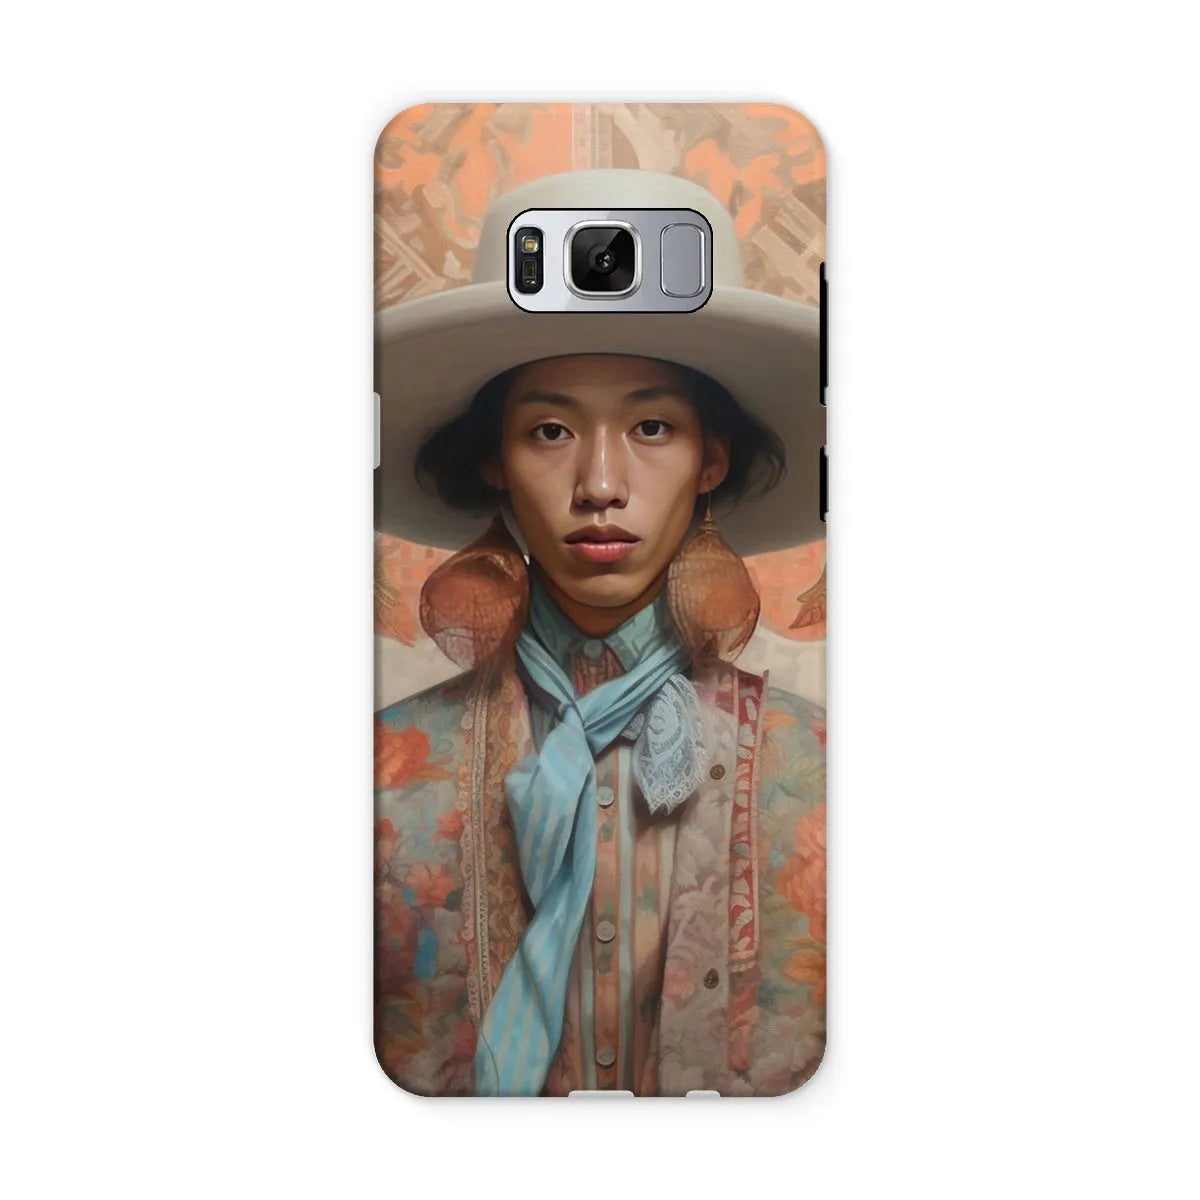 Iyaan - Gay Malay Asian Cowboy Aesthetic Art Phone Case - Samsung Galaxy S8 / Matte - Mobile Phone Cases - Aesthetic Art